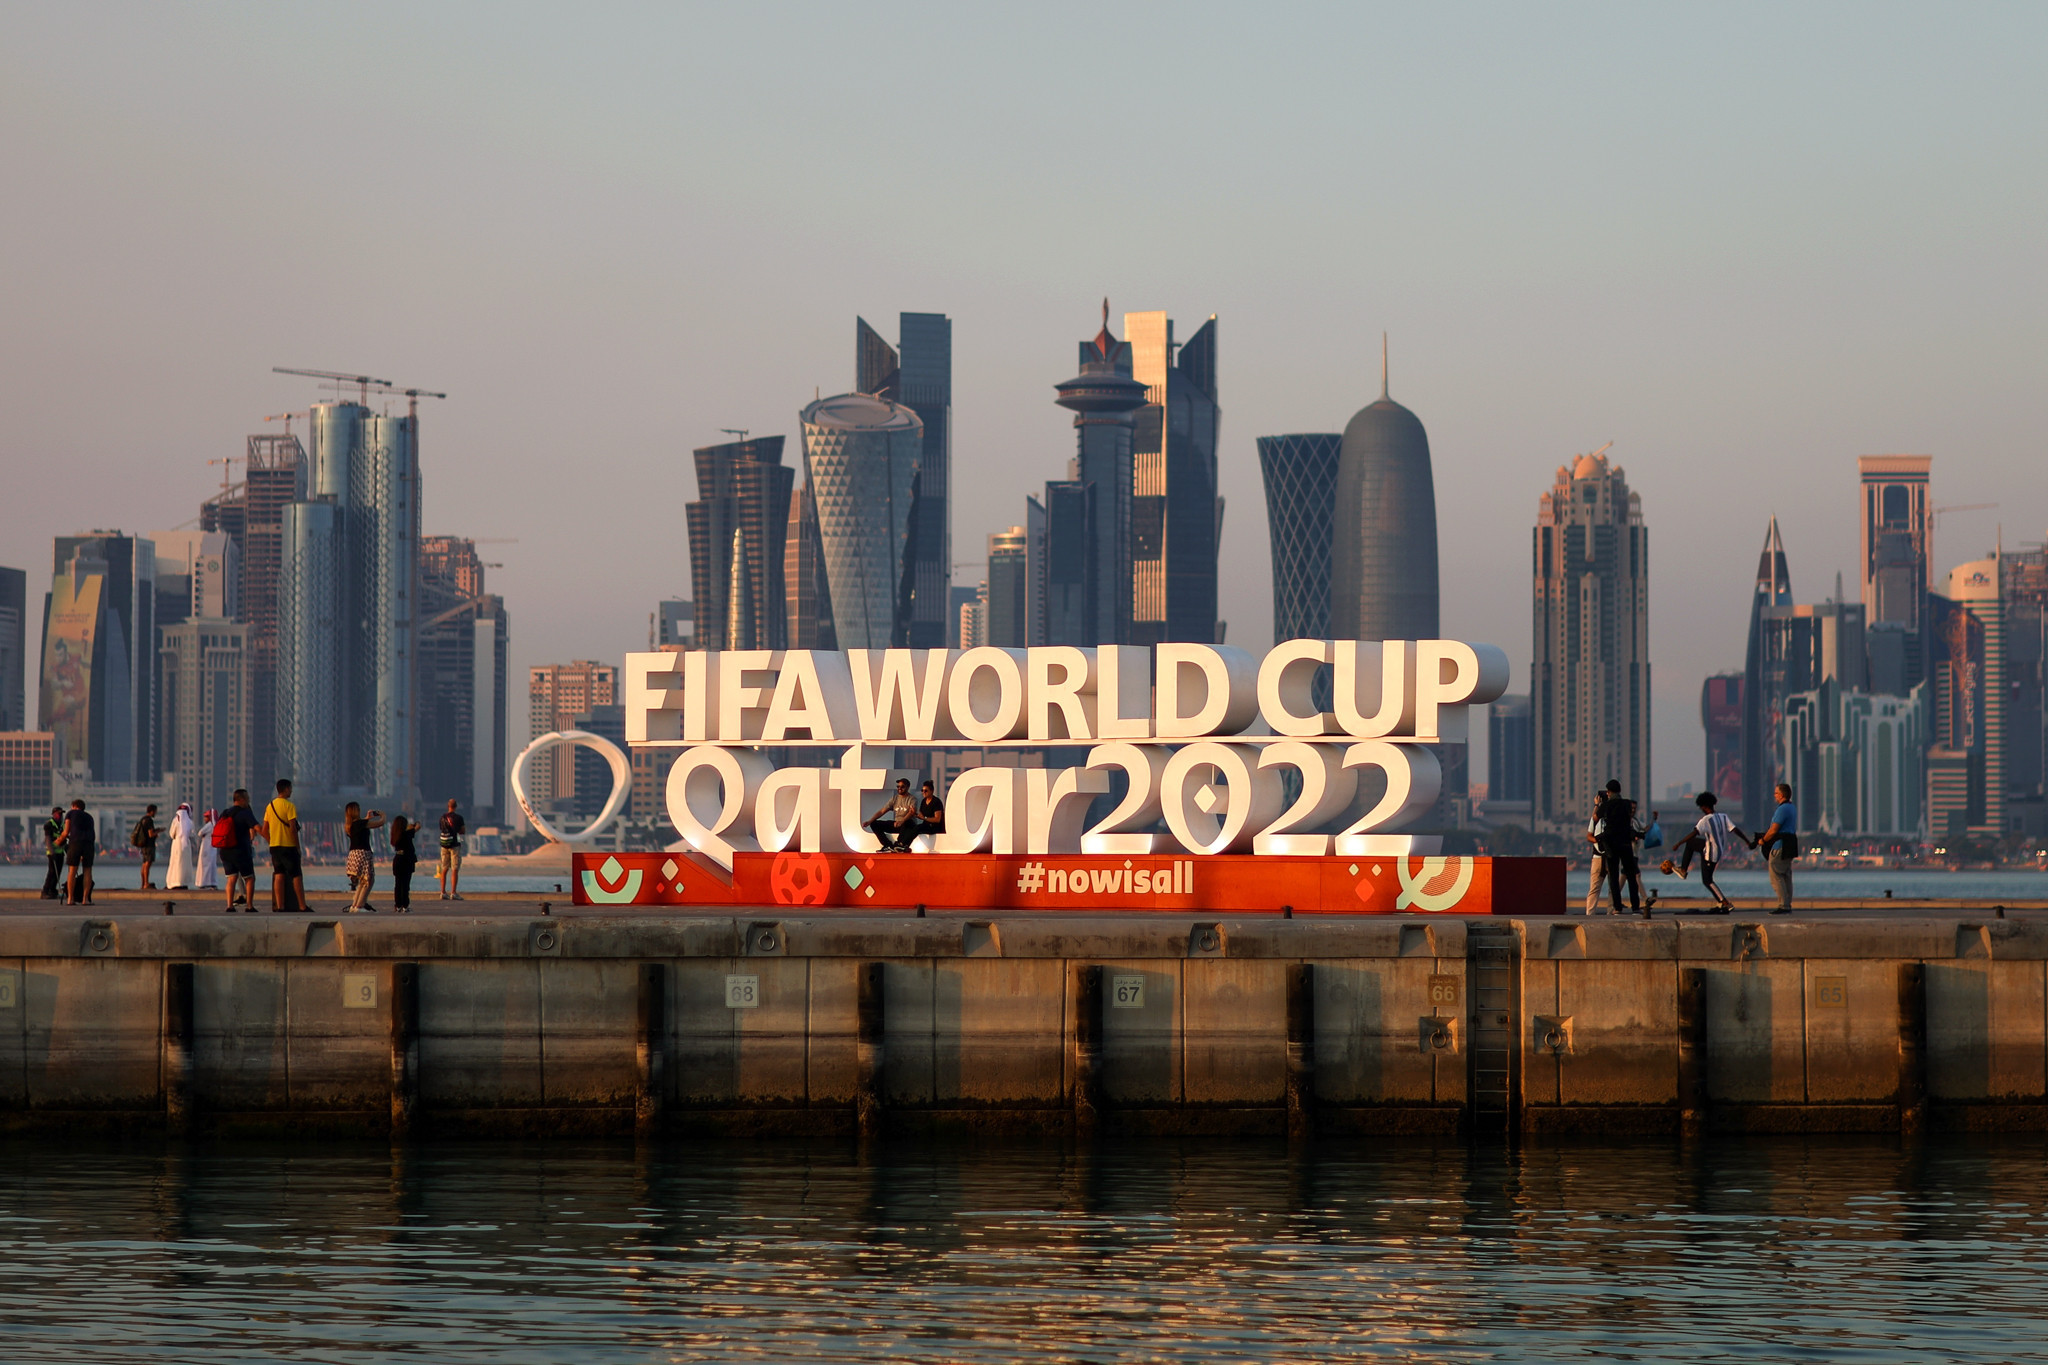 Norway Football Association President calls for full analysis of death toll related to Qatar 2022 World Cup